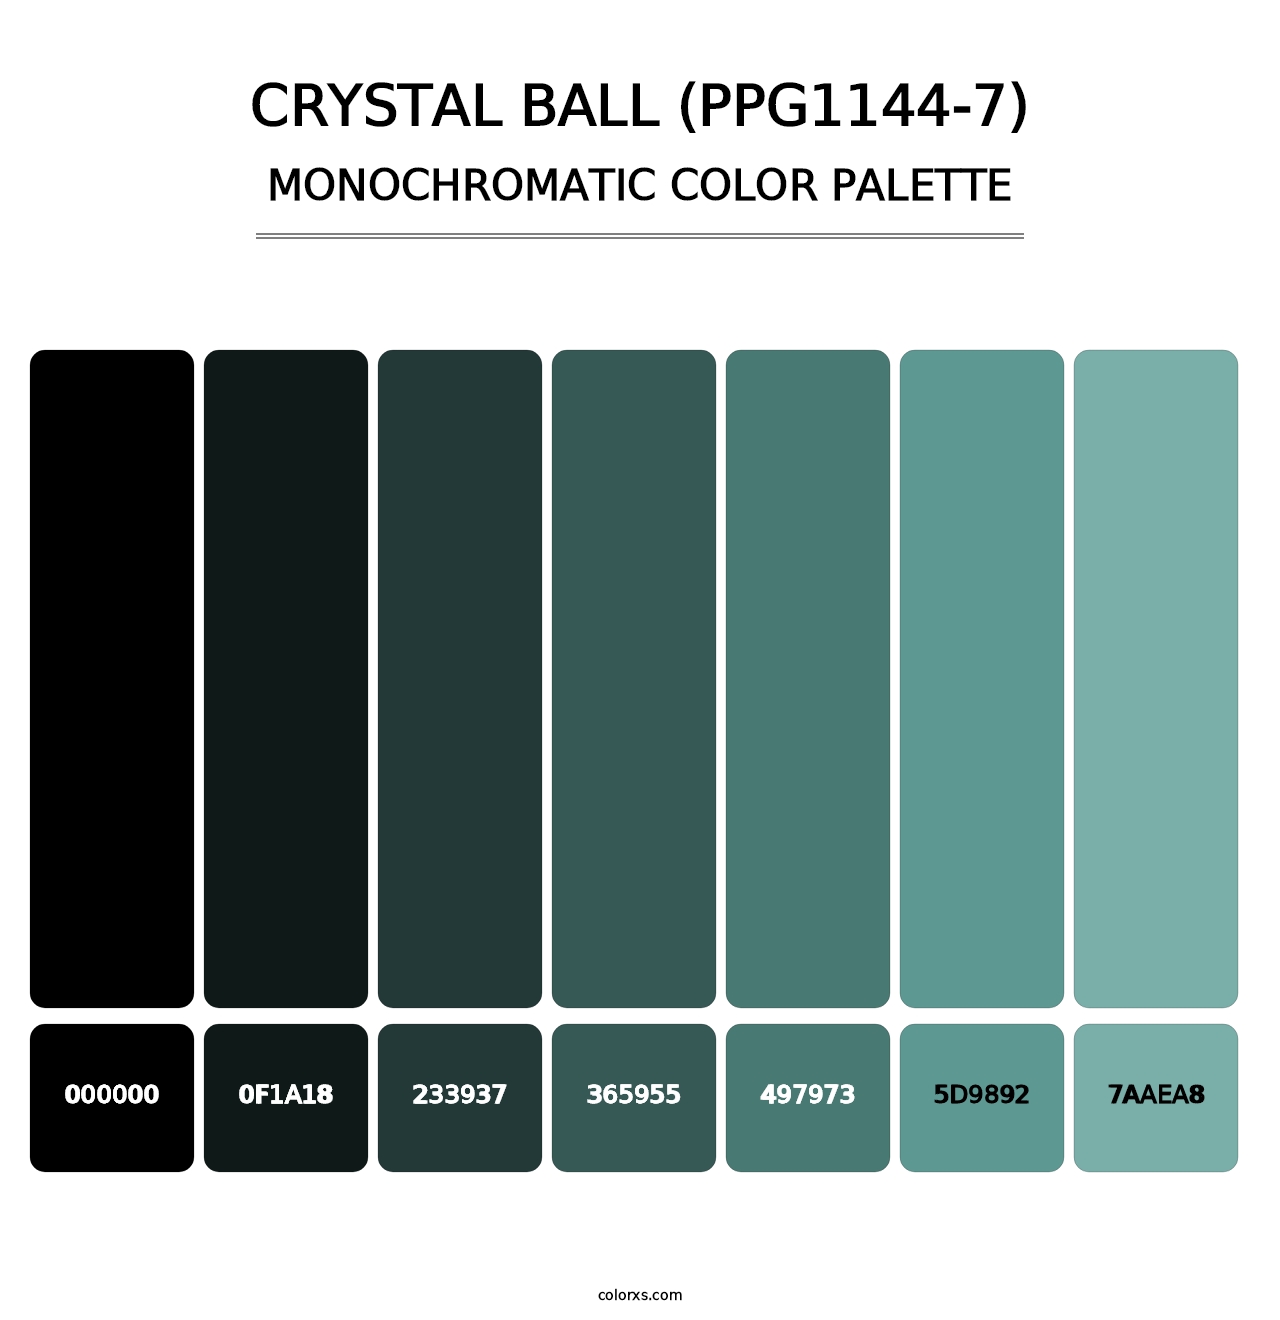 Crystal Ball (PPG1144-7) - Monochromatic Color Palette